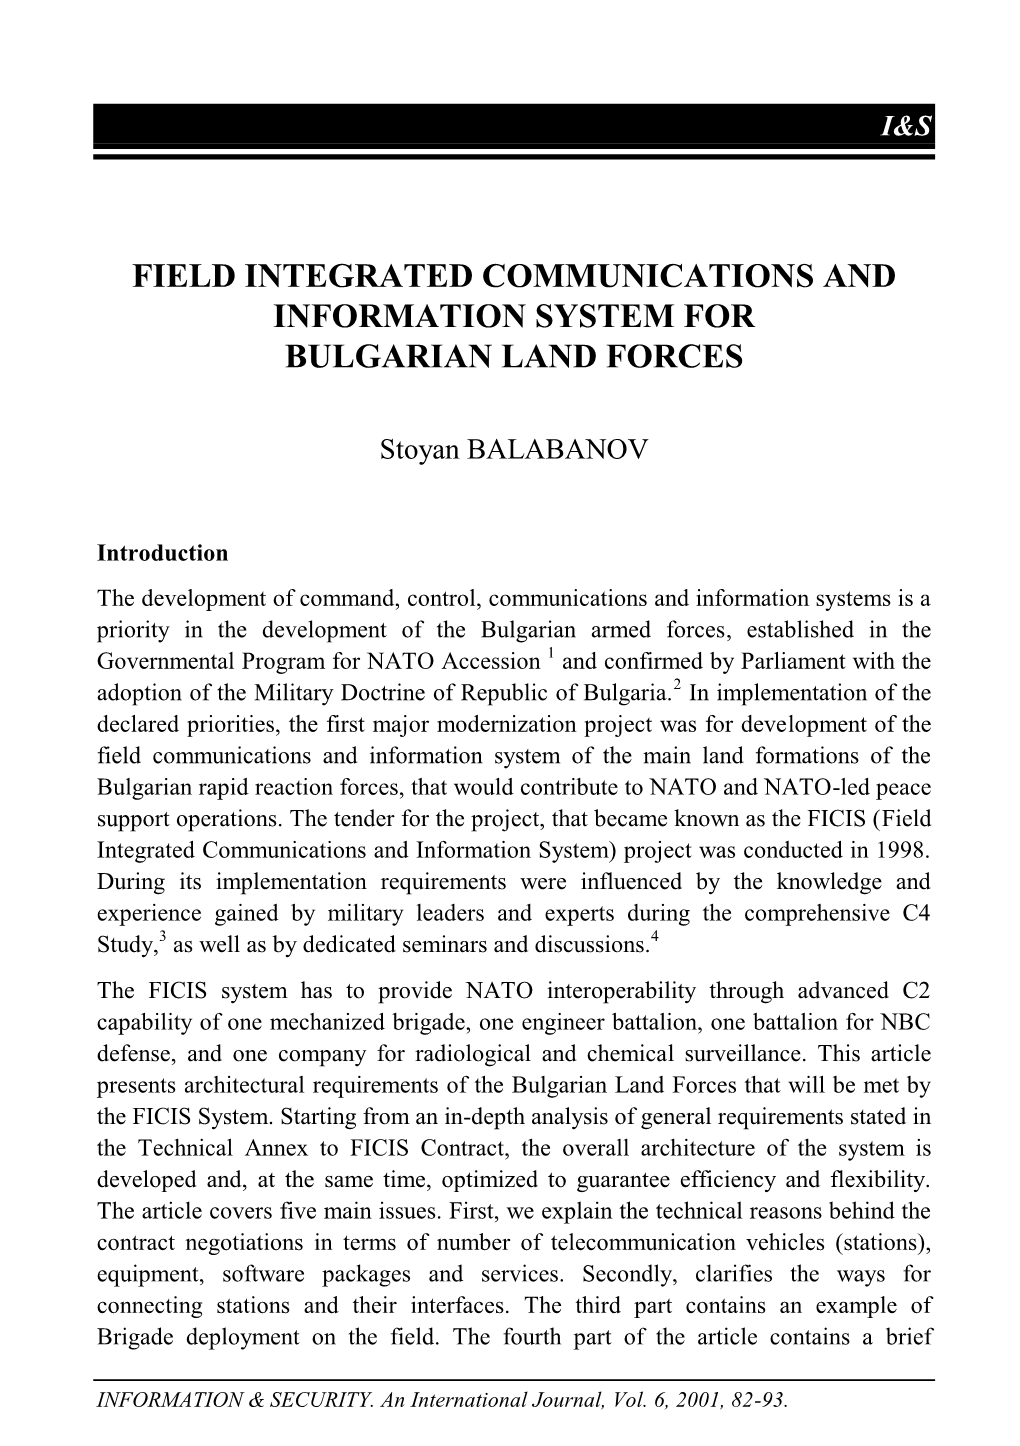 Field Integrated Communications and Information System for Bulgarian Land Forces